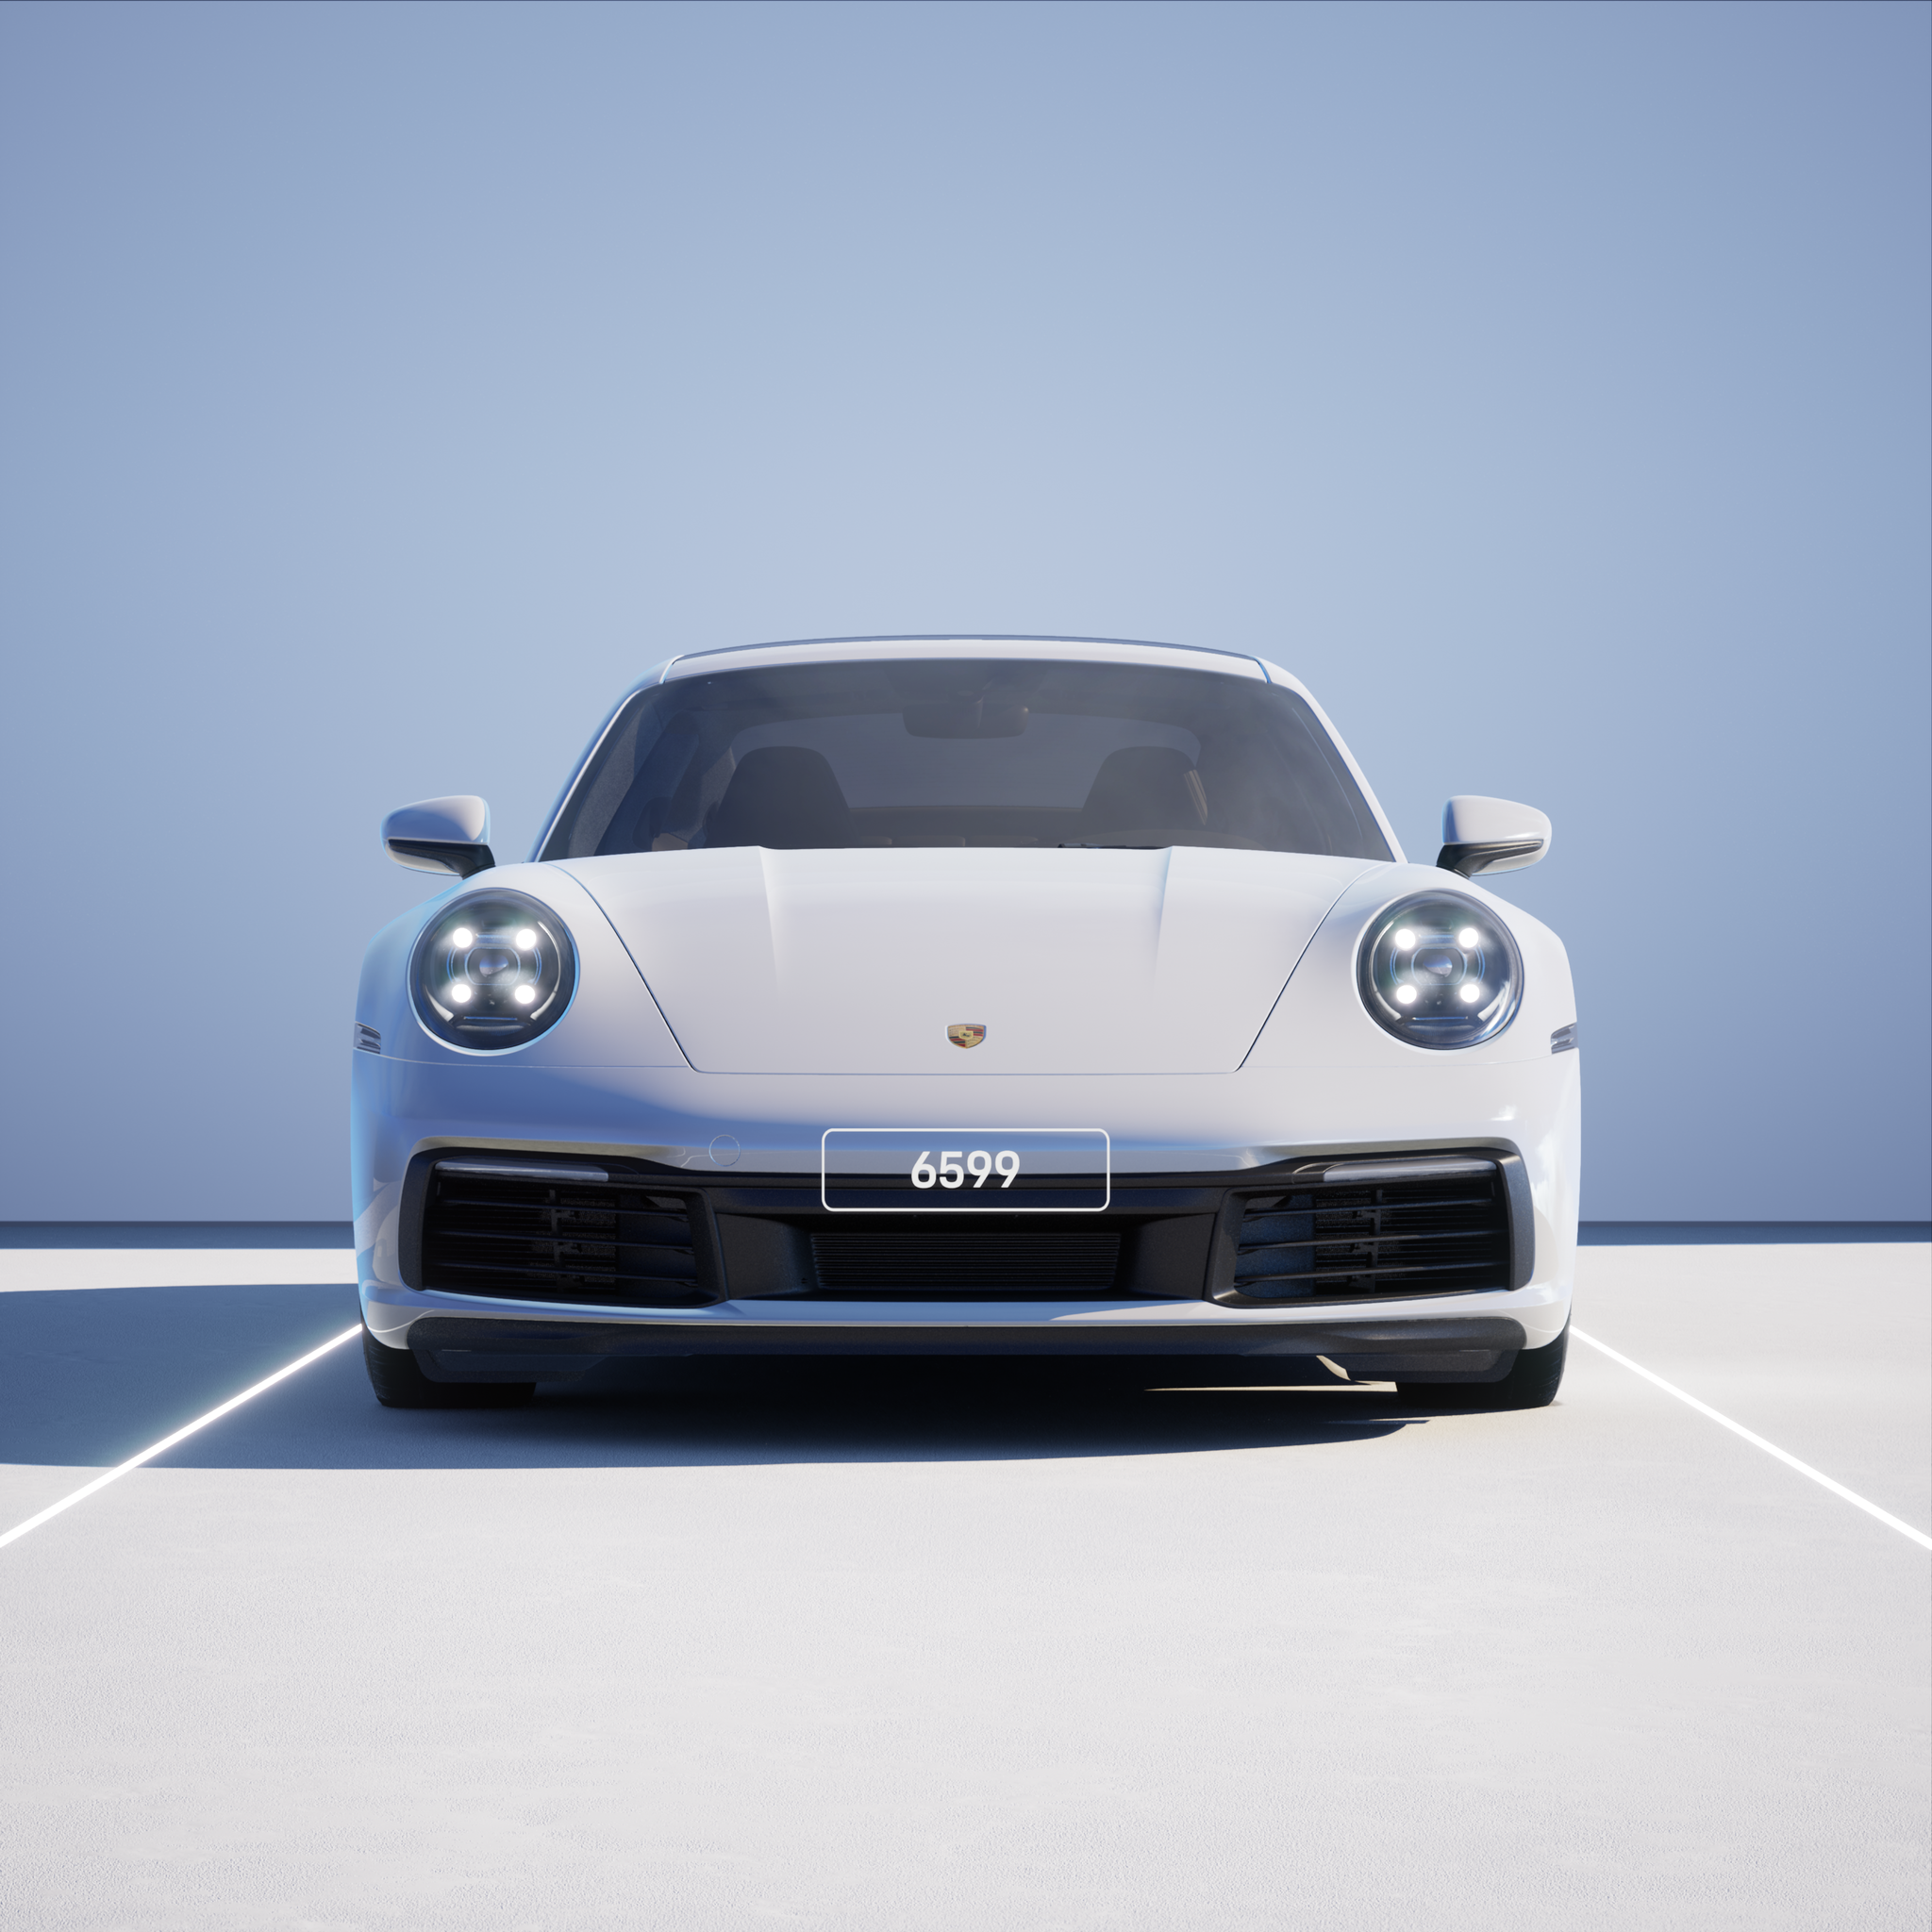 The PORSCHΞ 911 6599 image in phase